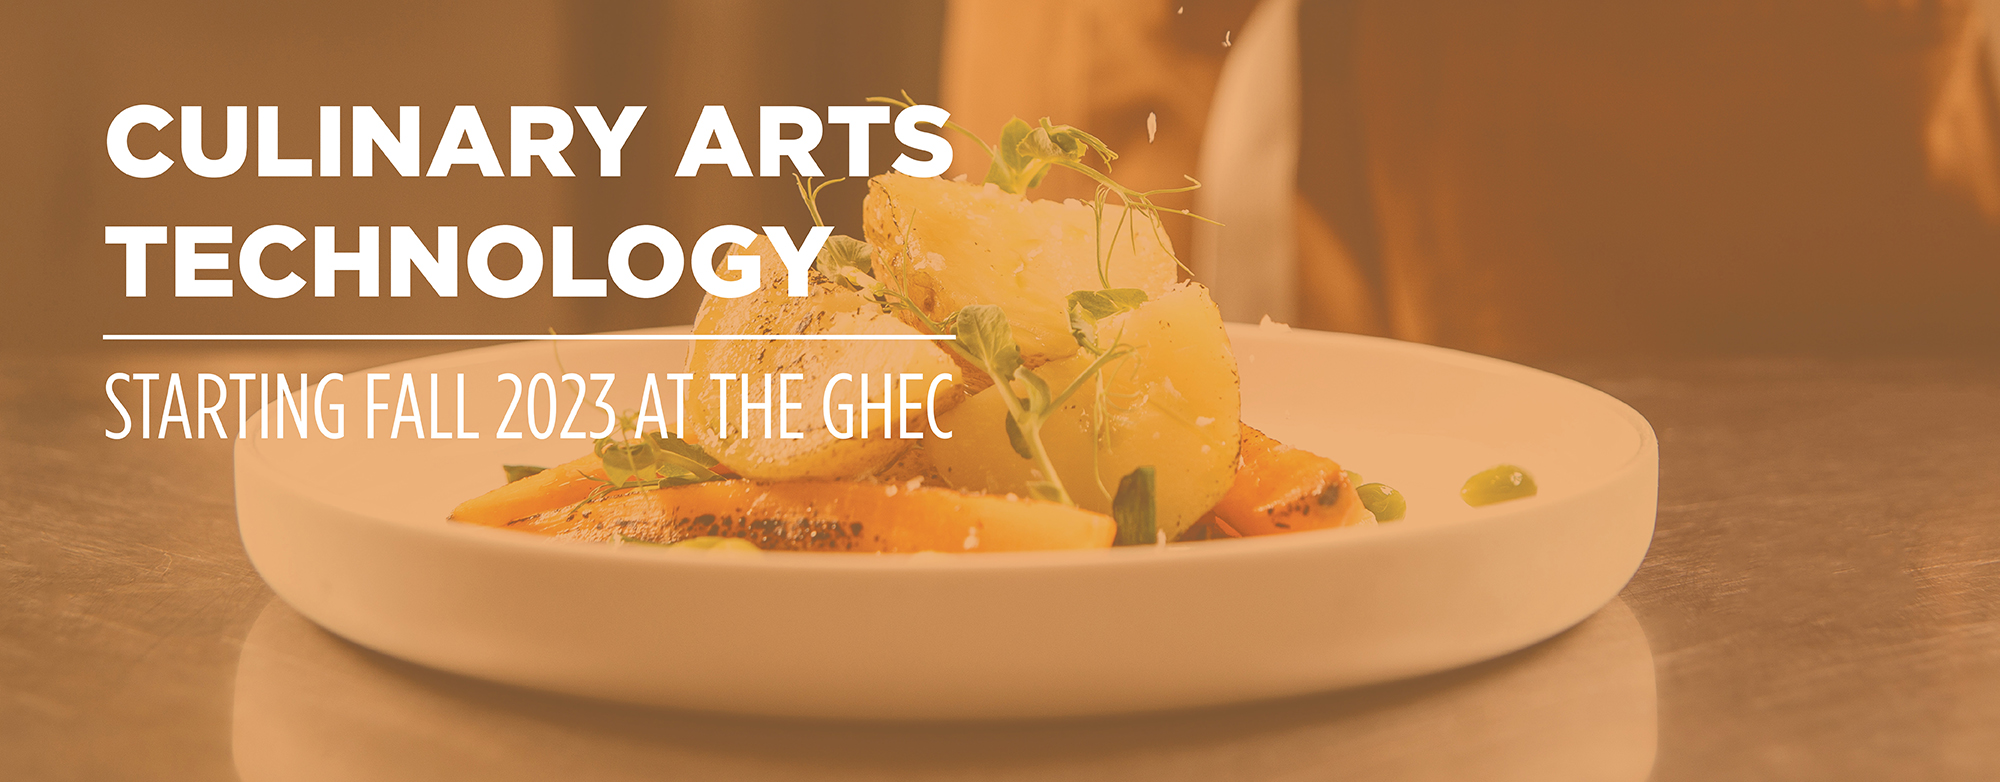 Culinary Arts coming to GHEC